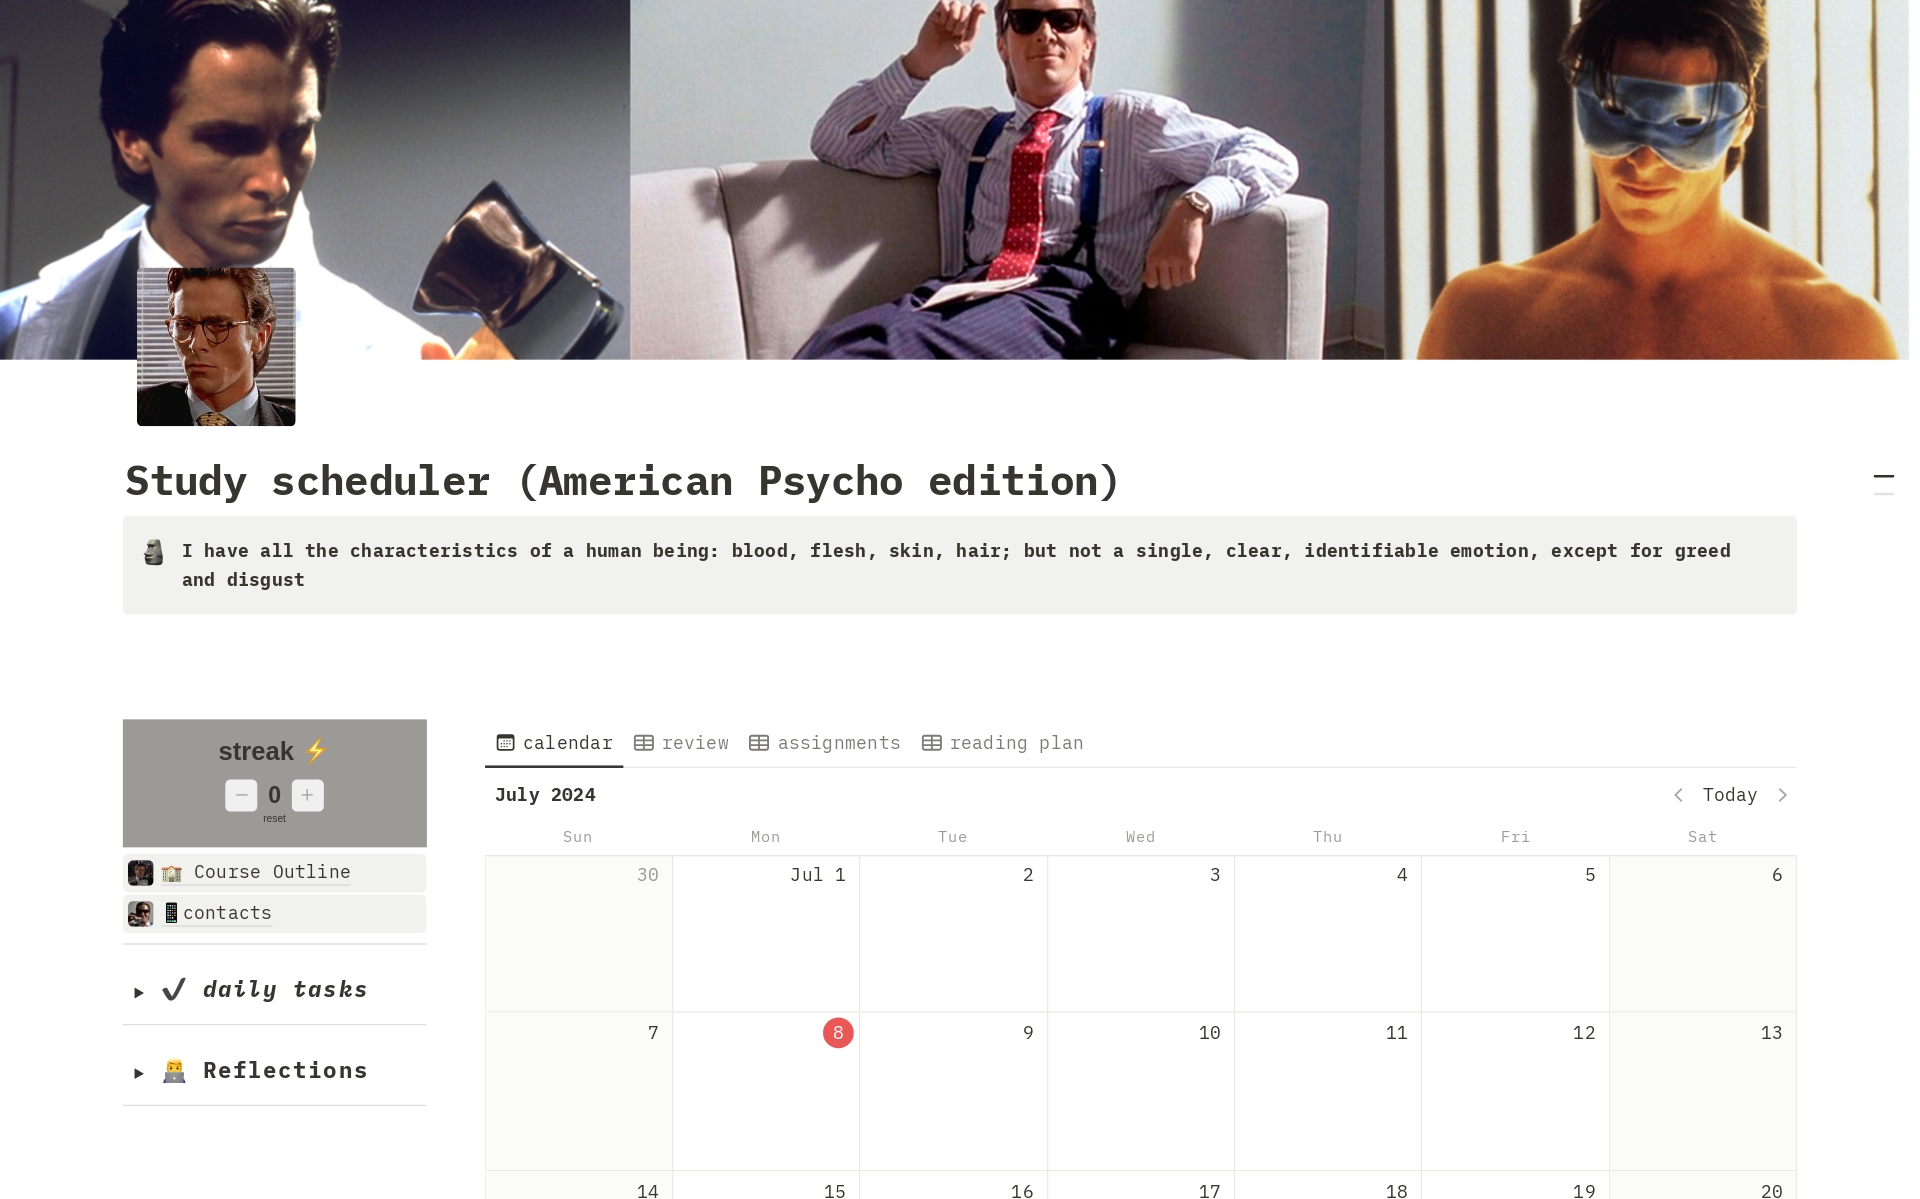 Stay organized and motivated with the "Study Scheduler (American Psycho Edition)" – get yours now!

sincerely 
Patrick Bateman